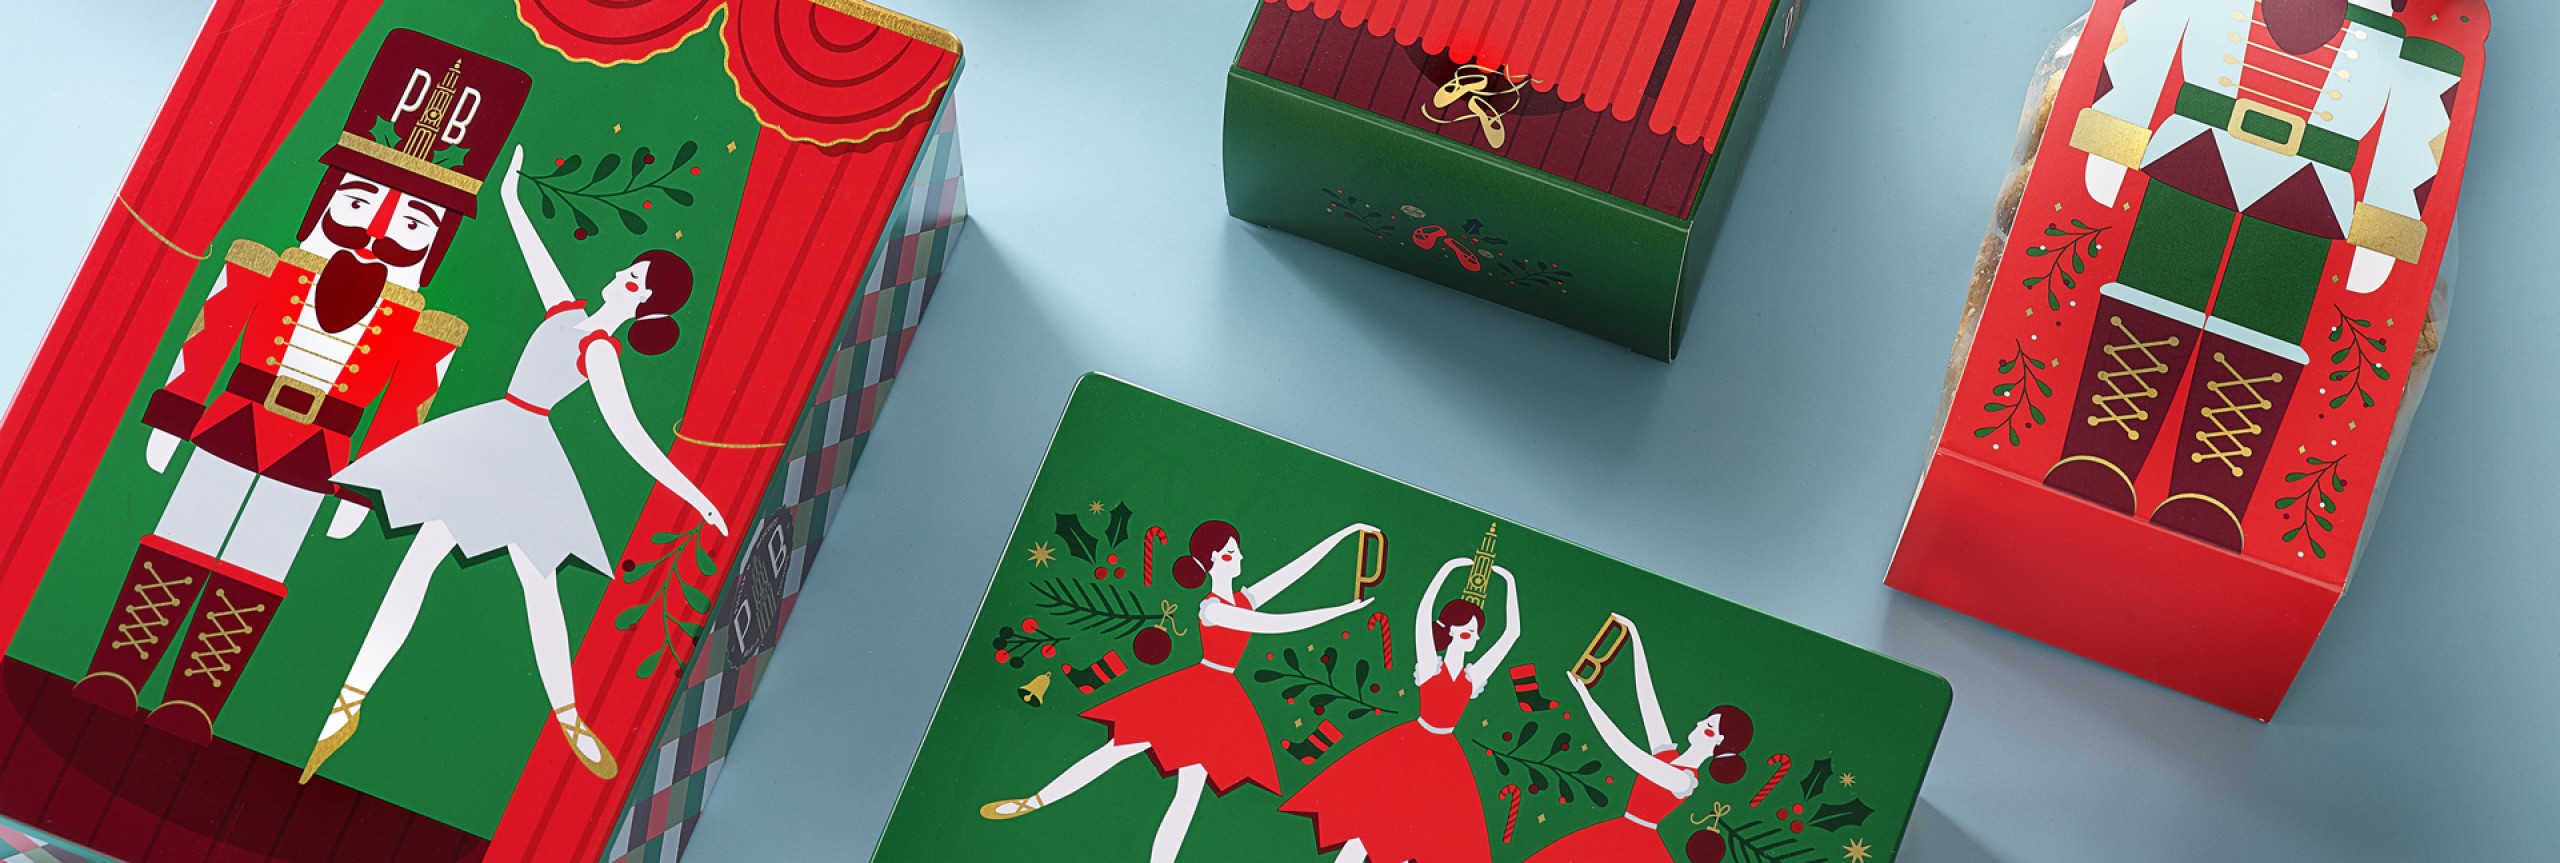 Quatre Mains package design - Package design philips biscuits, nutcracker, end of year